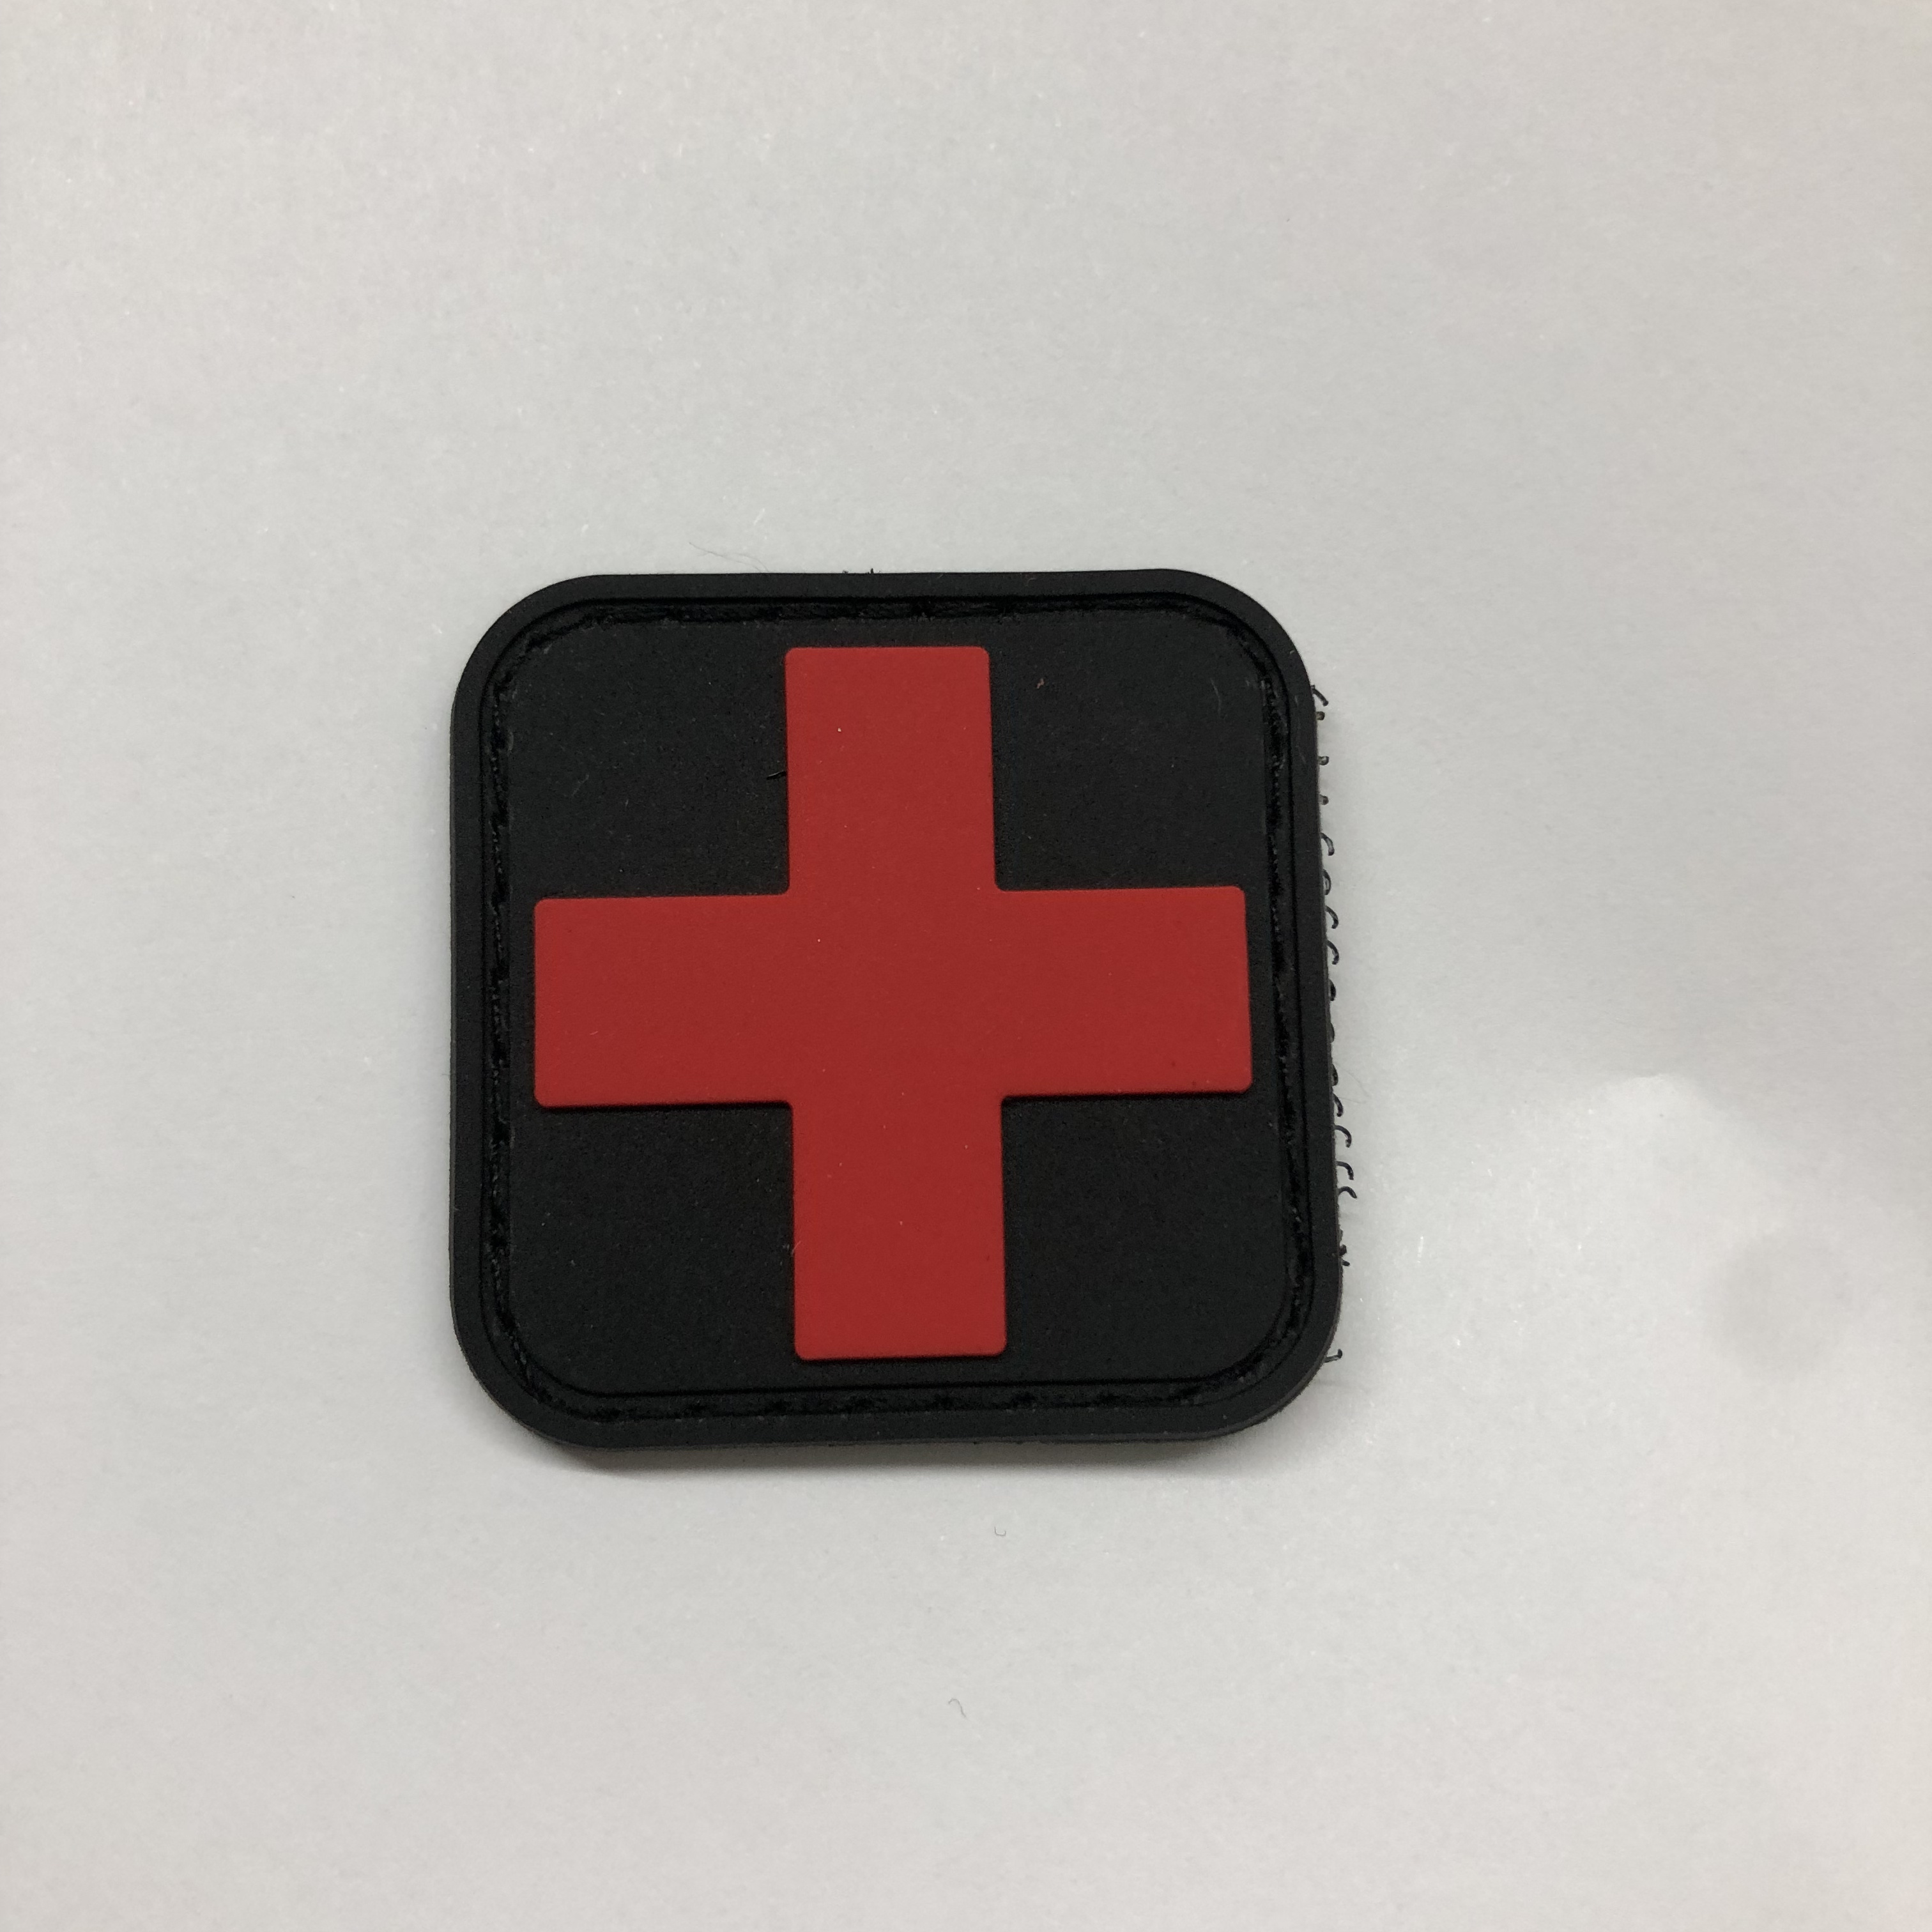 FIRST AID PATCH